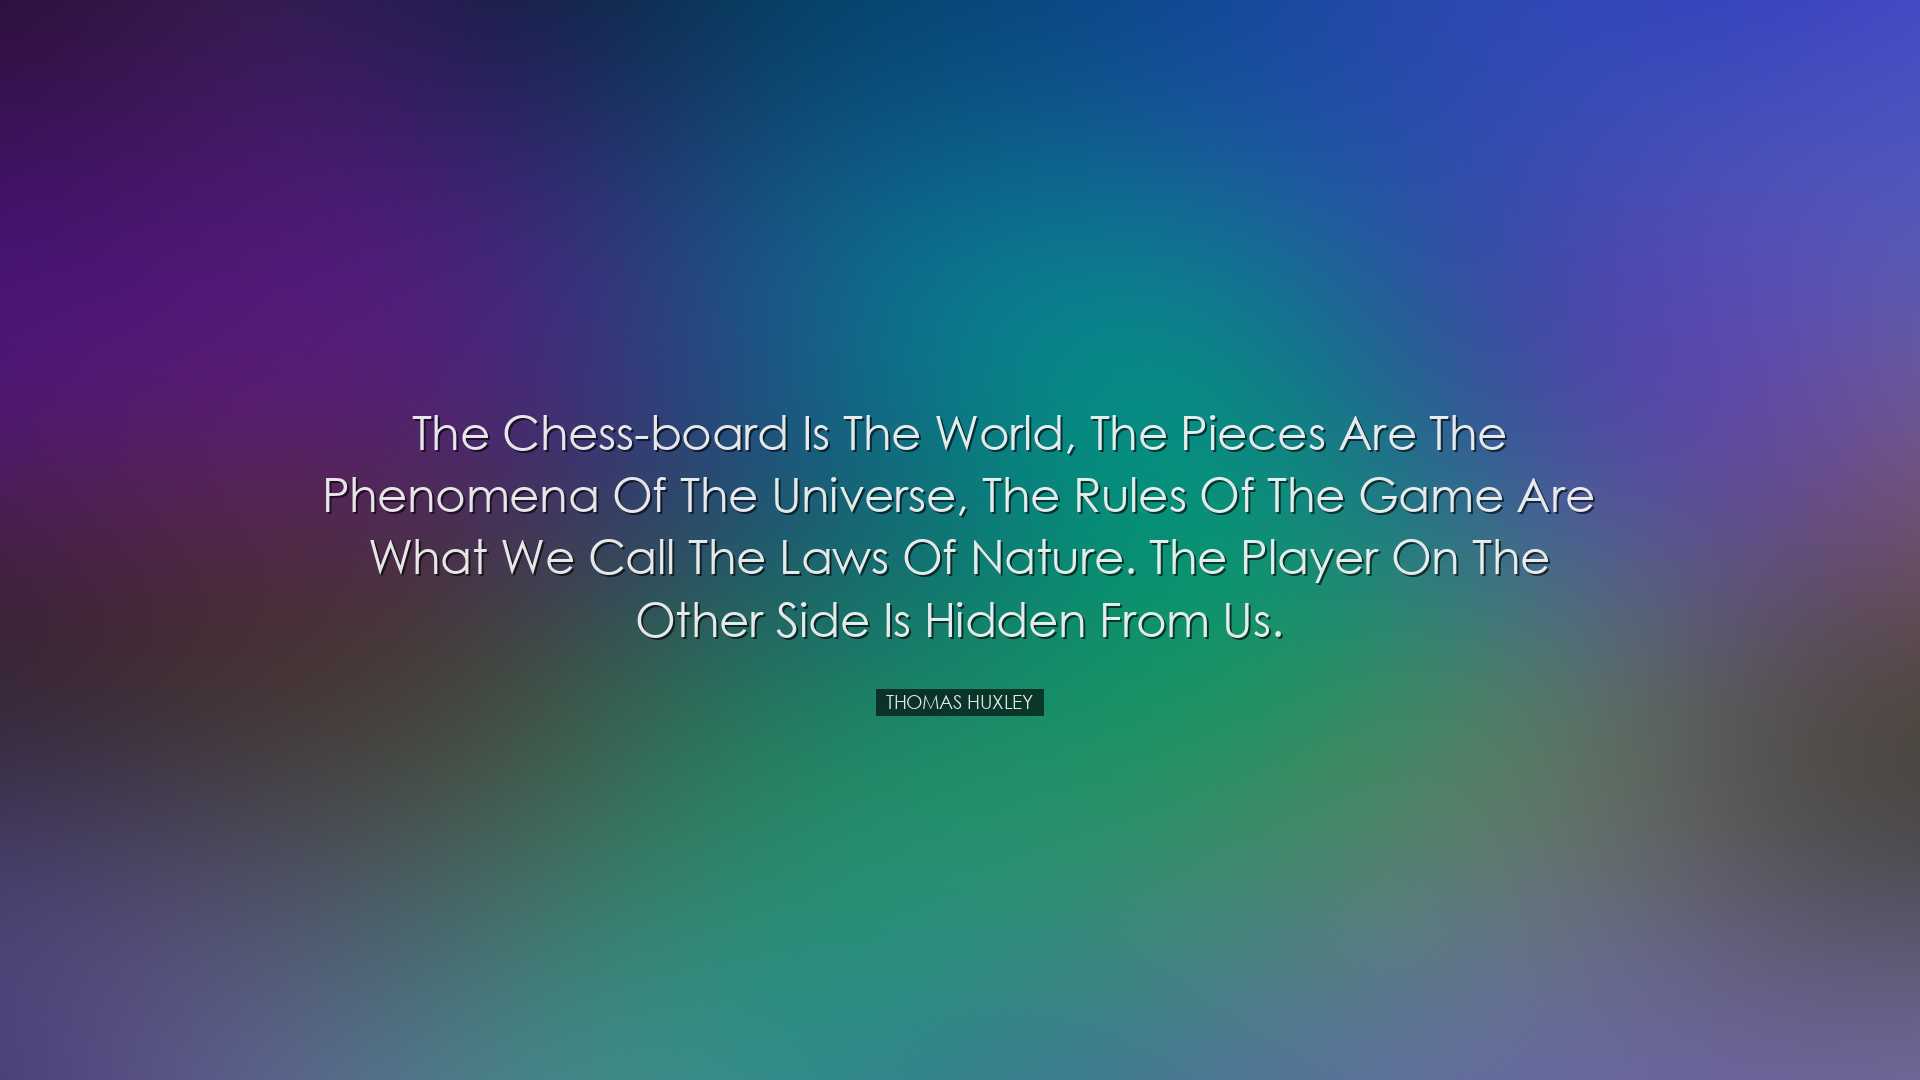 The chess-board is the world, the pieces are the phenomena of the